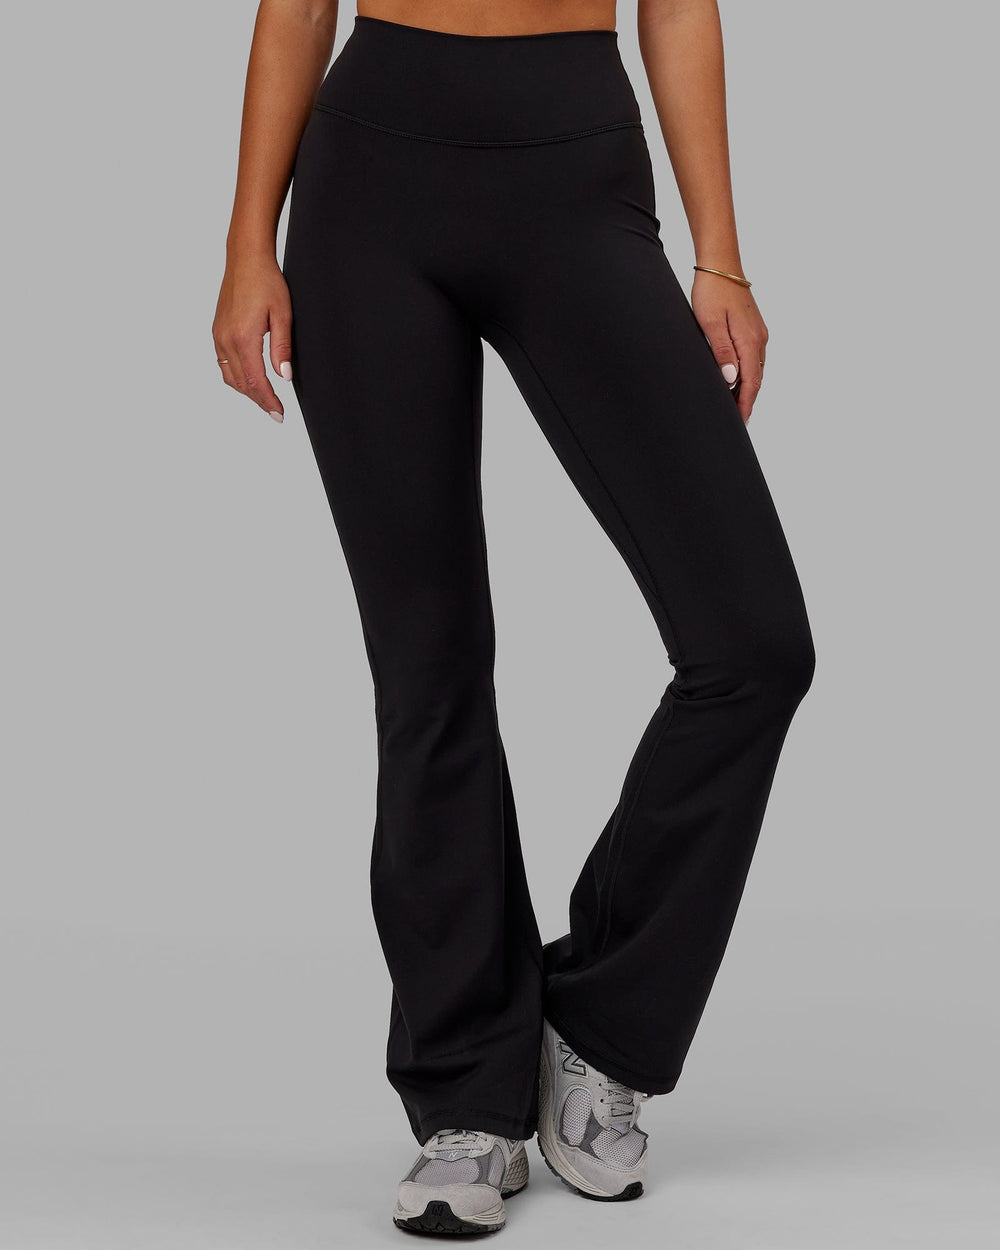 No Nonsense Women's Relaxed Fit Flared Legging, Black, Small at